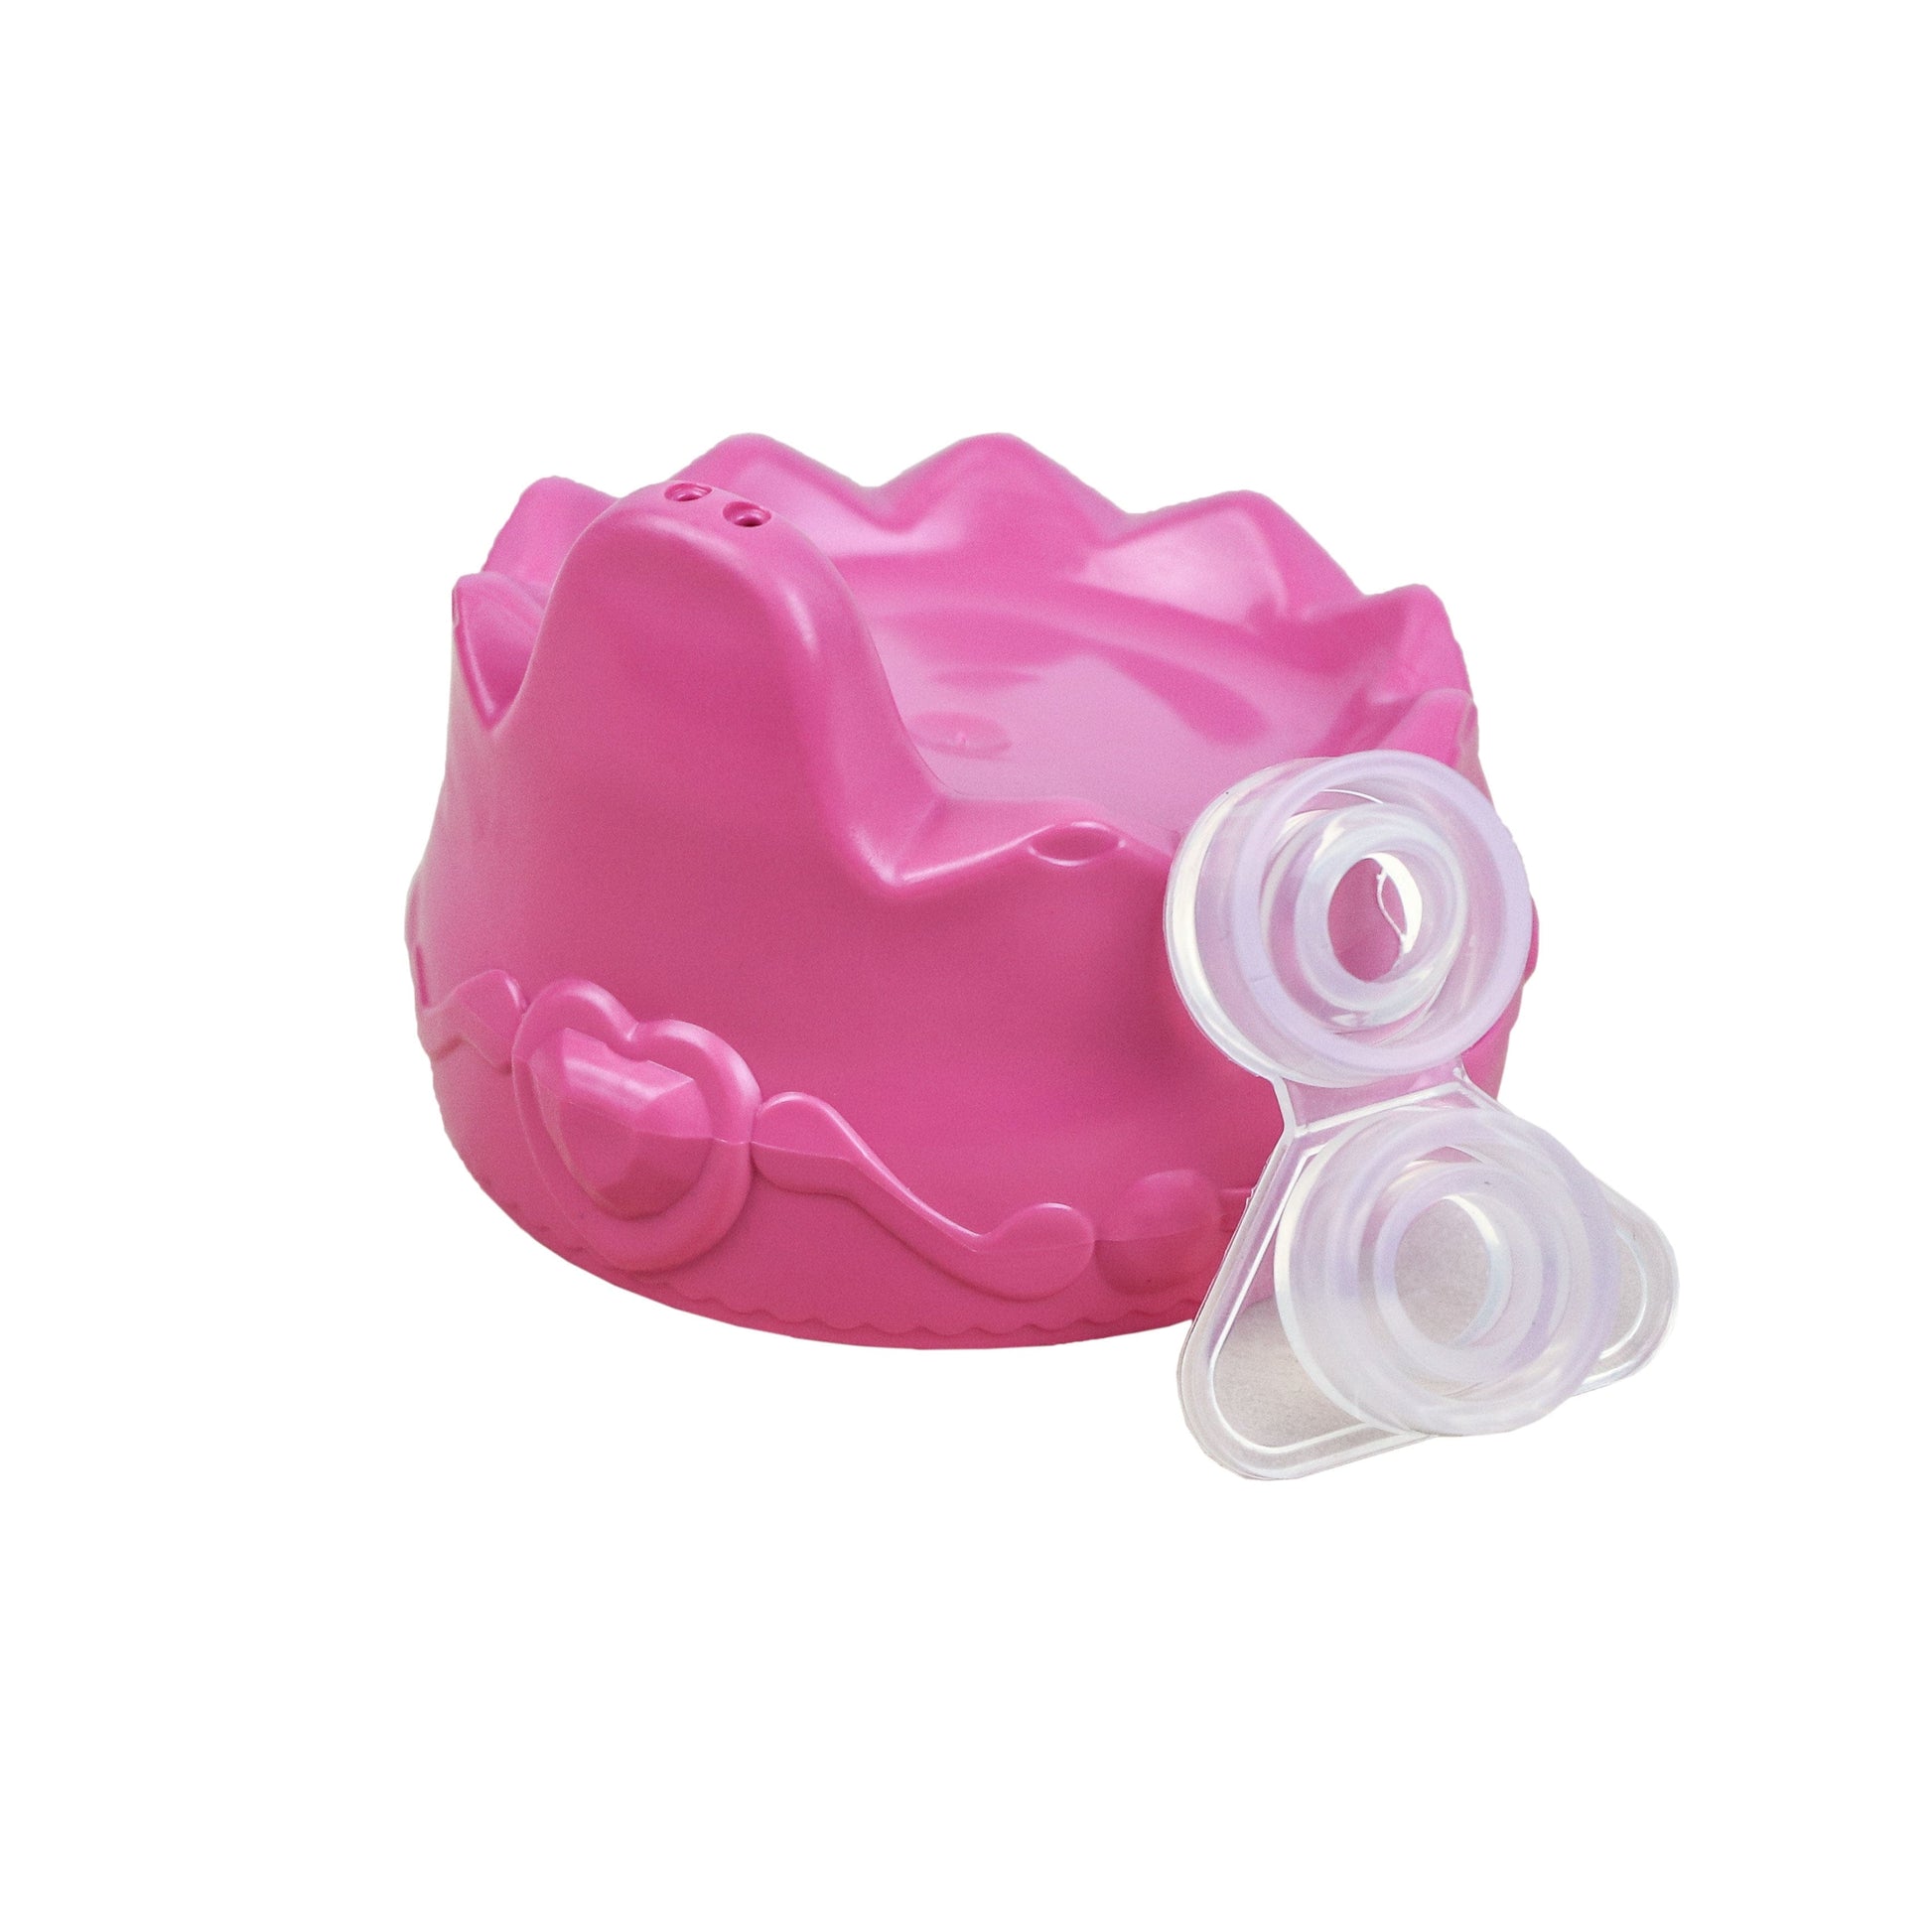 Re-Play No-Spill Sippy Cup | Princess Re-Play No-Spill Sippy Cup | Princess 